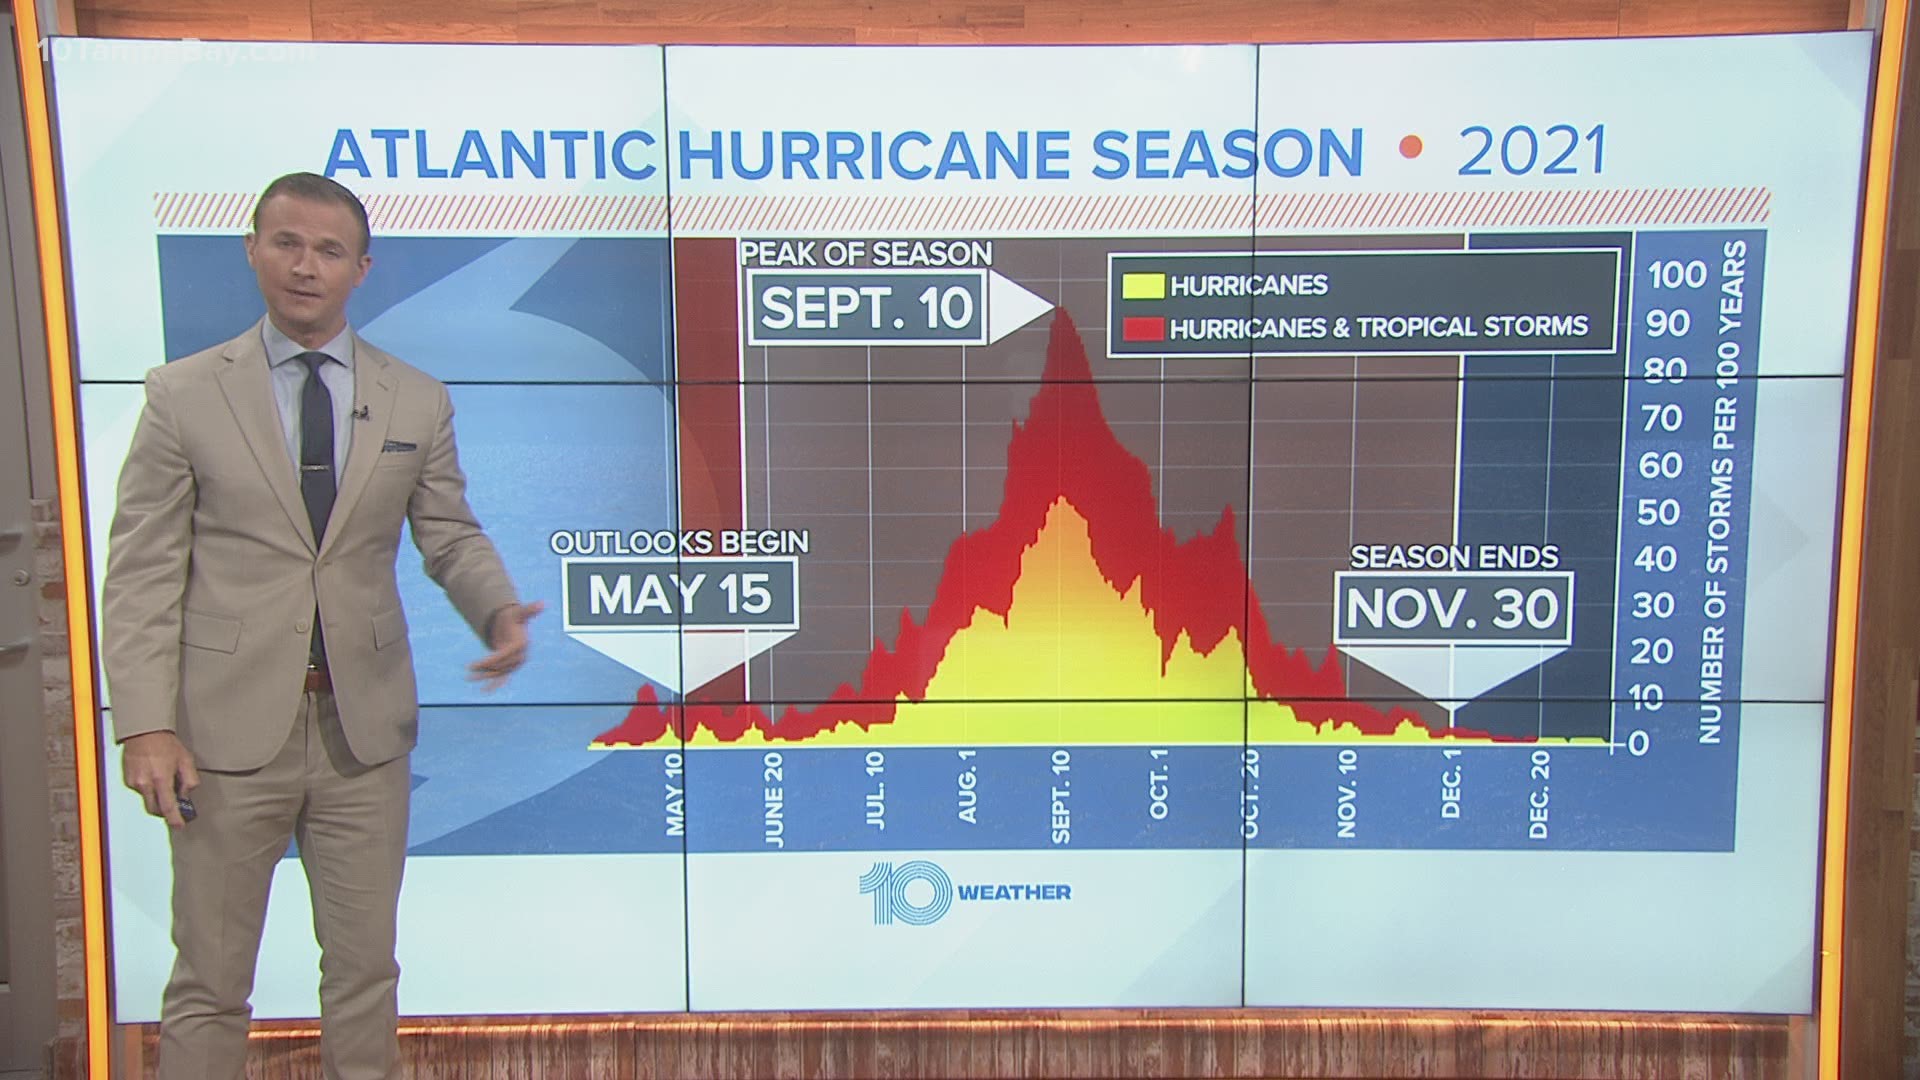 Tropical outlooks began being issued on May 15, even though hurricane season doesn't officially start until June 1.